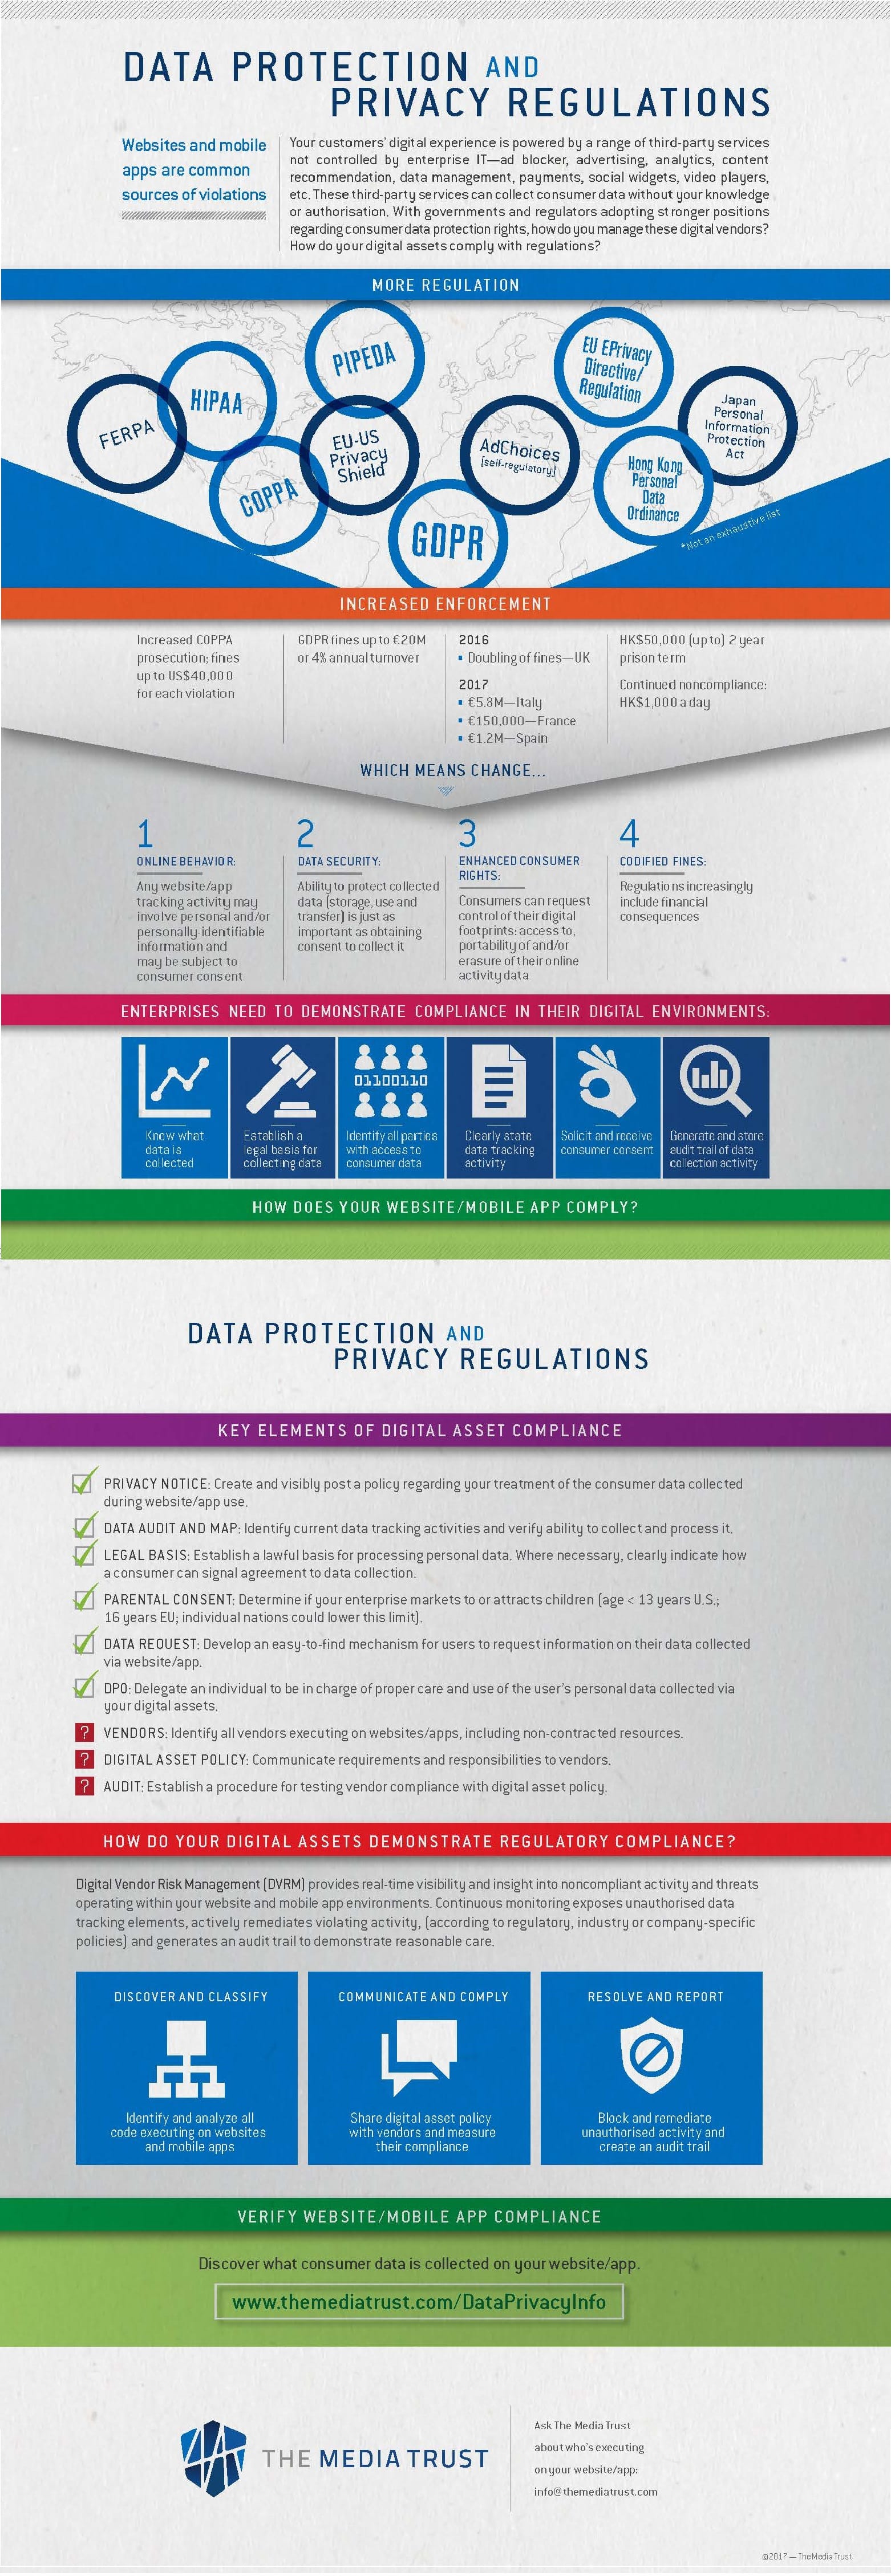 Data Protection and Privacy Regulations